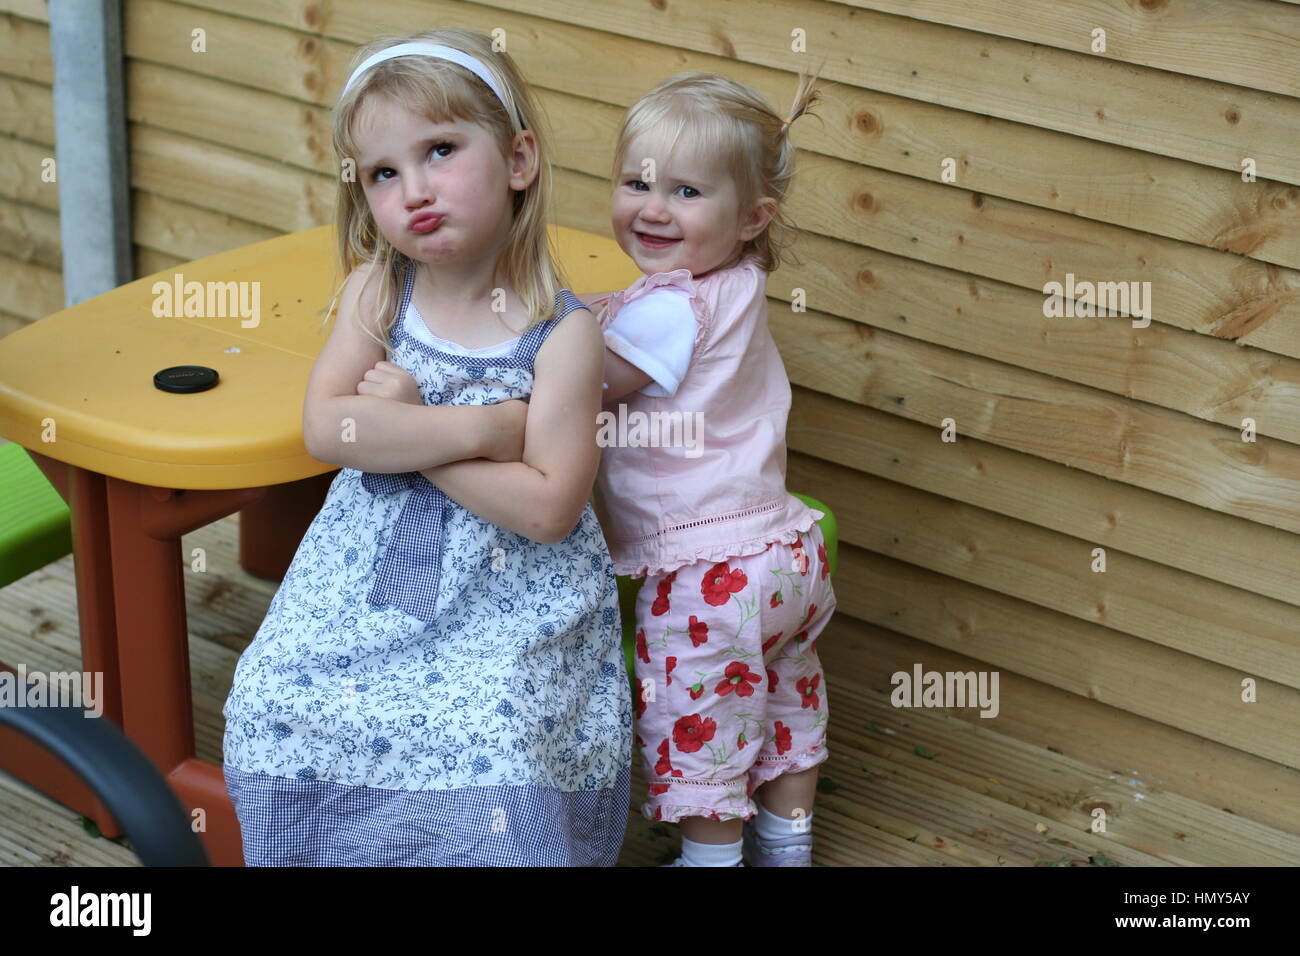 Children playing together in the garden, making a funny face kids thinking child thinking, messing goofing sisters sisterly love concept Stock Photo